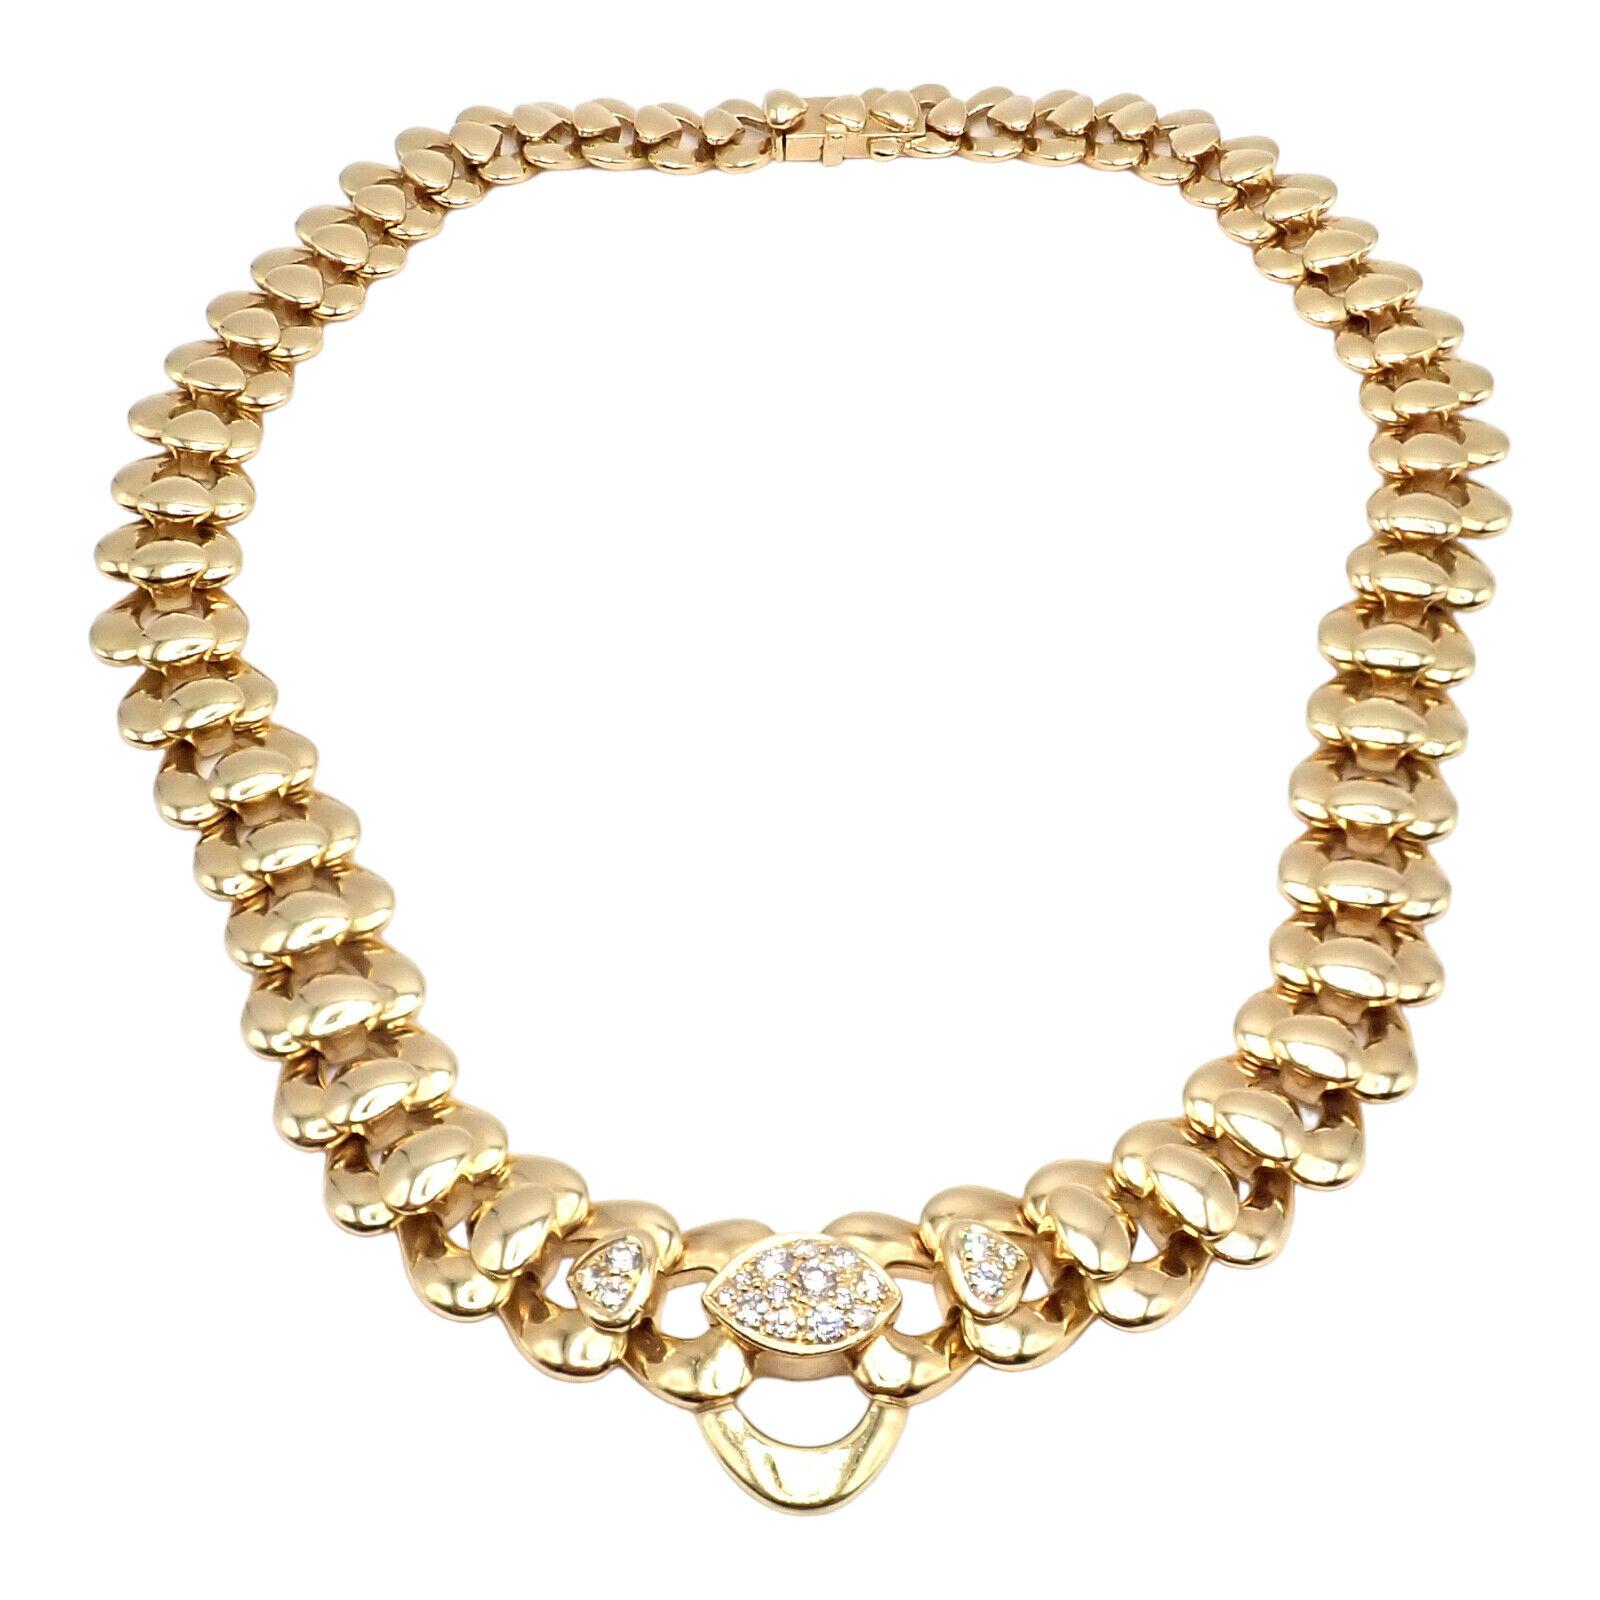 18k Yellow Gold Diamond Heart Shape Link Statement Necklace by Marina B. 
With 19 round brilliant cut diamonds VS1 clarity, G color
This authentic Marina B statement necklace radiates luxury and style. It's masterfully crafted from 18k yellow gold,